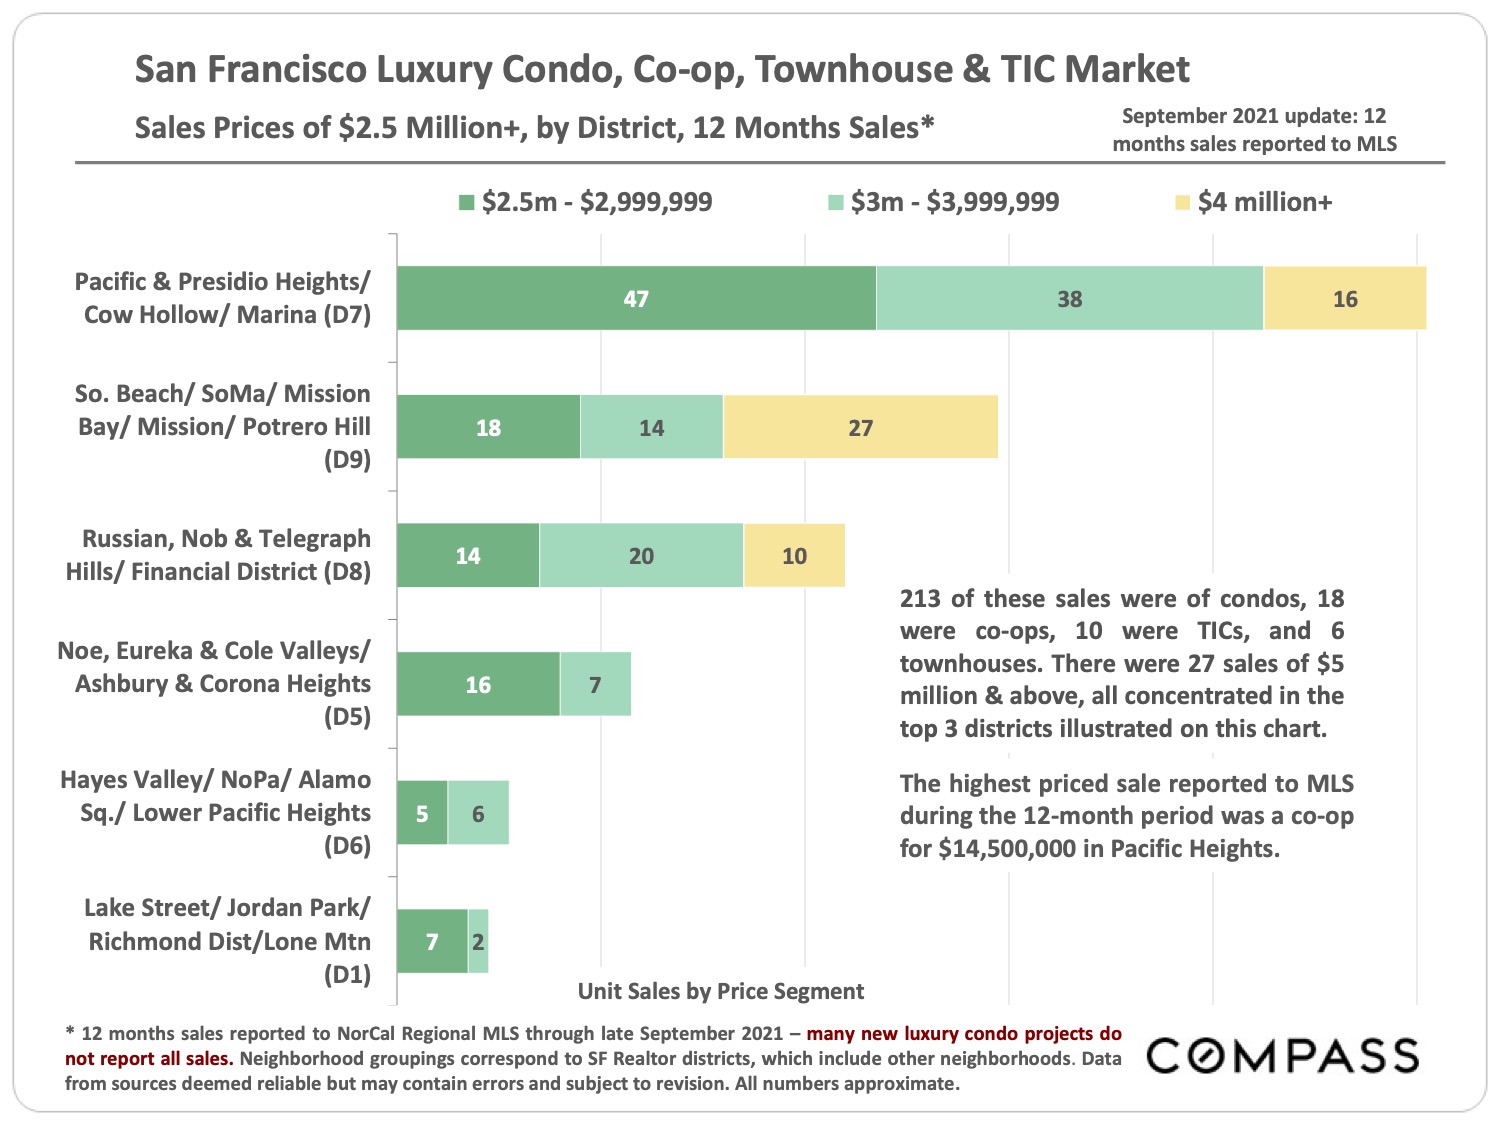 San Francisco Luxury Condo, Co-op, Townhouse and TIC Market - Sales Price of 2.5 Million+, by District, 12 Months Sales